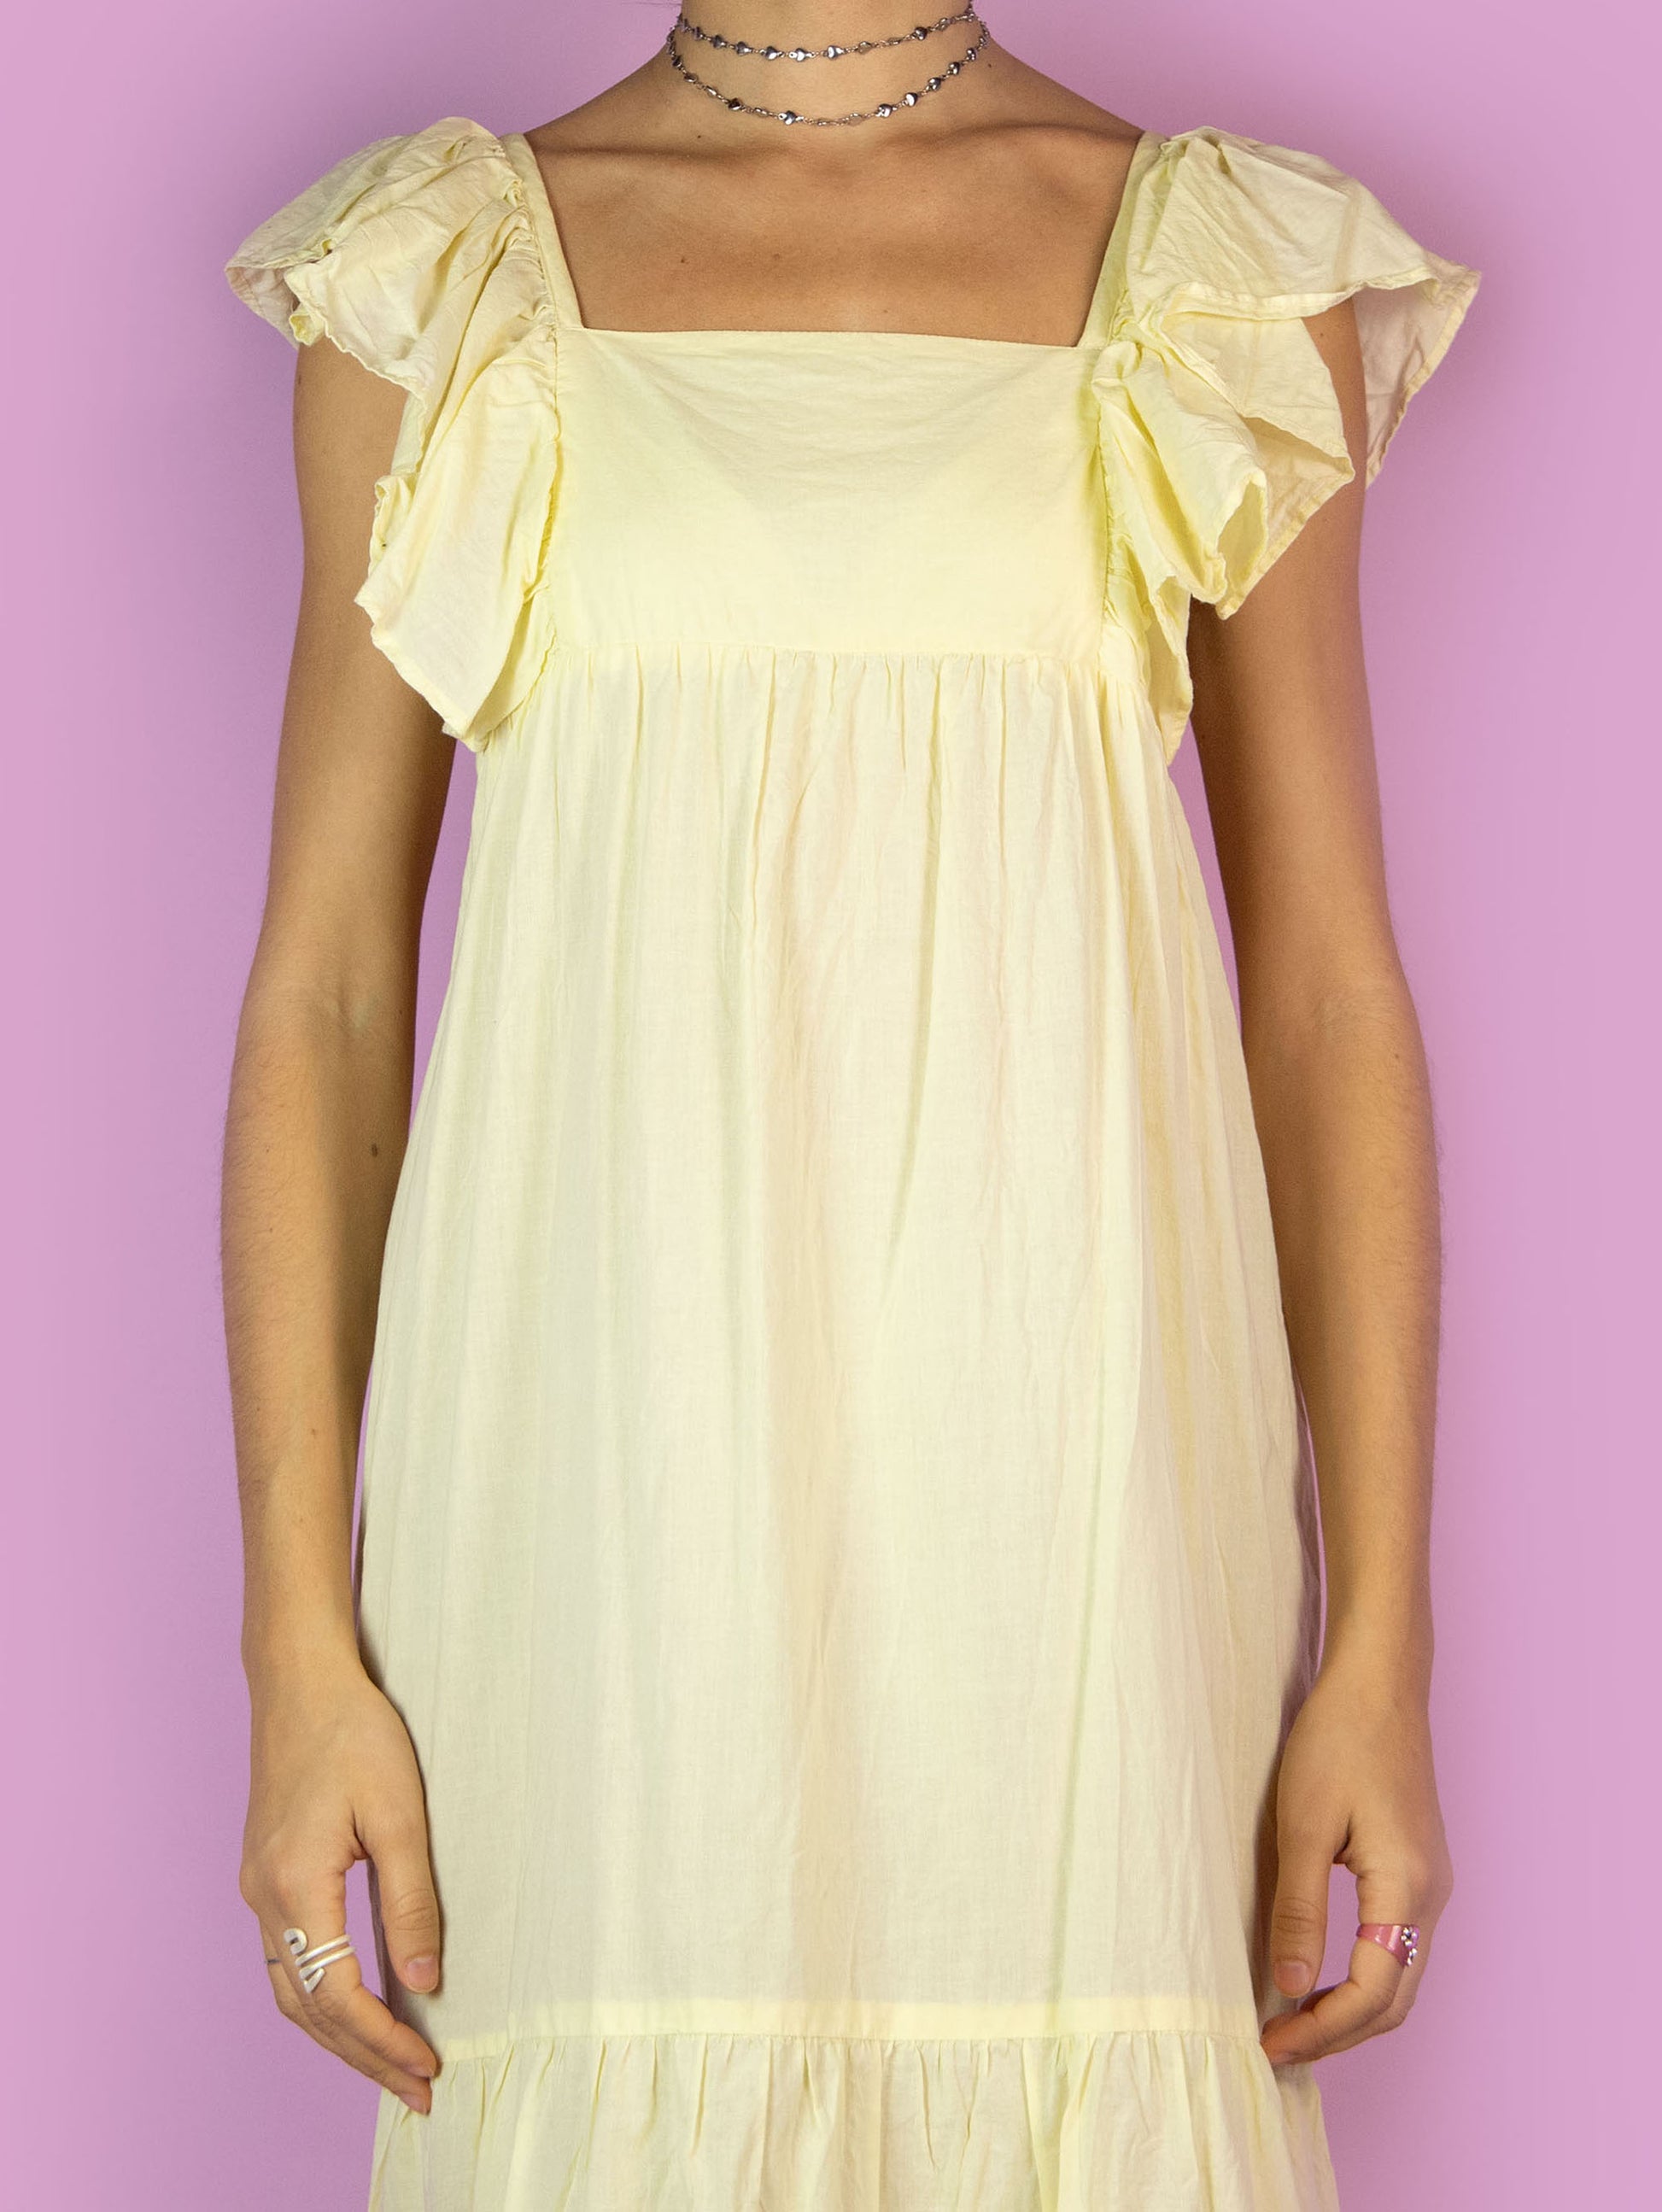 The Y2K Boho Tiered Midi Dress is a vintage light pastel yellow dress with a slightly transparent tiered design and ruffles on the straps. Summer 2000s beach cover up maxi dress.